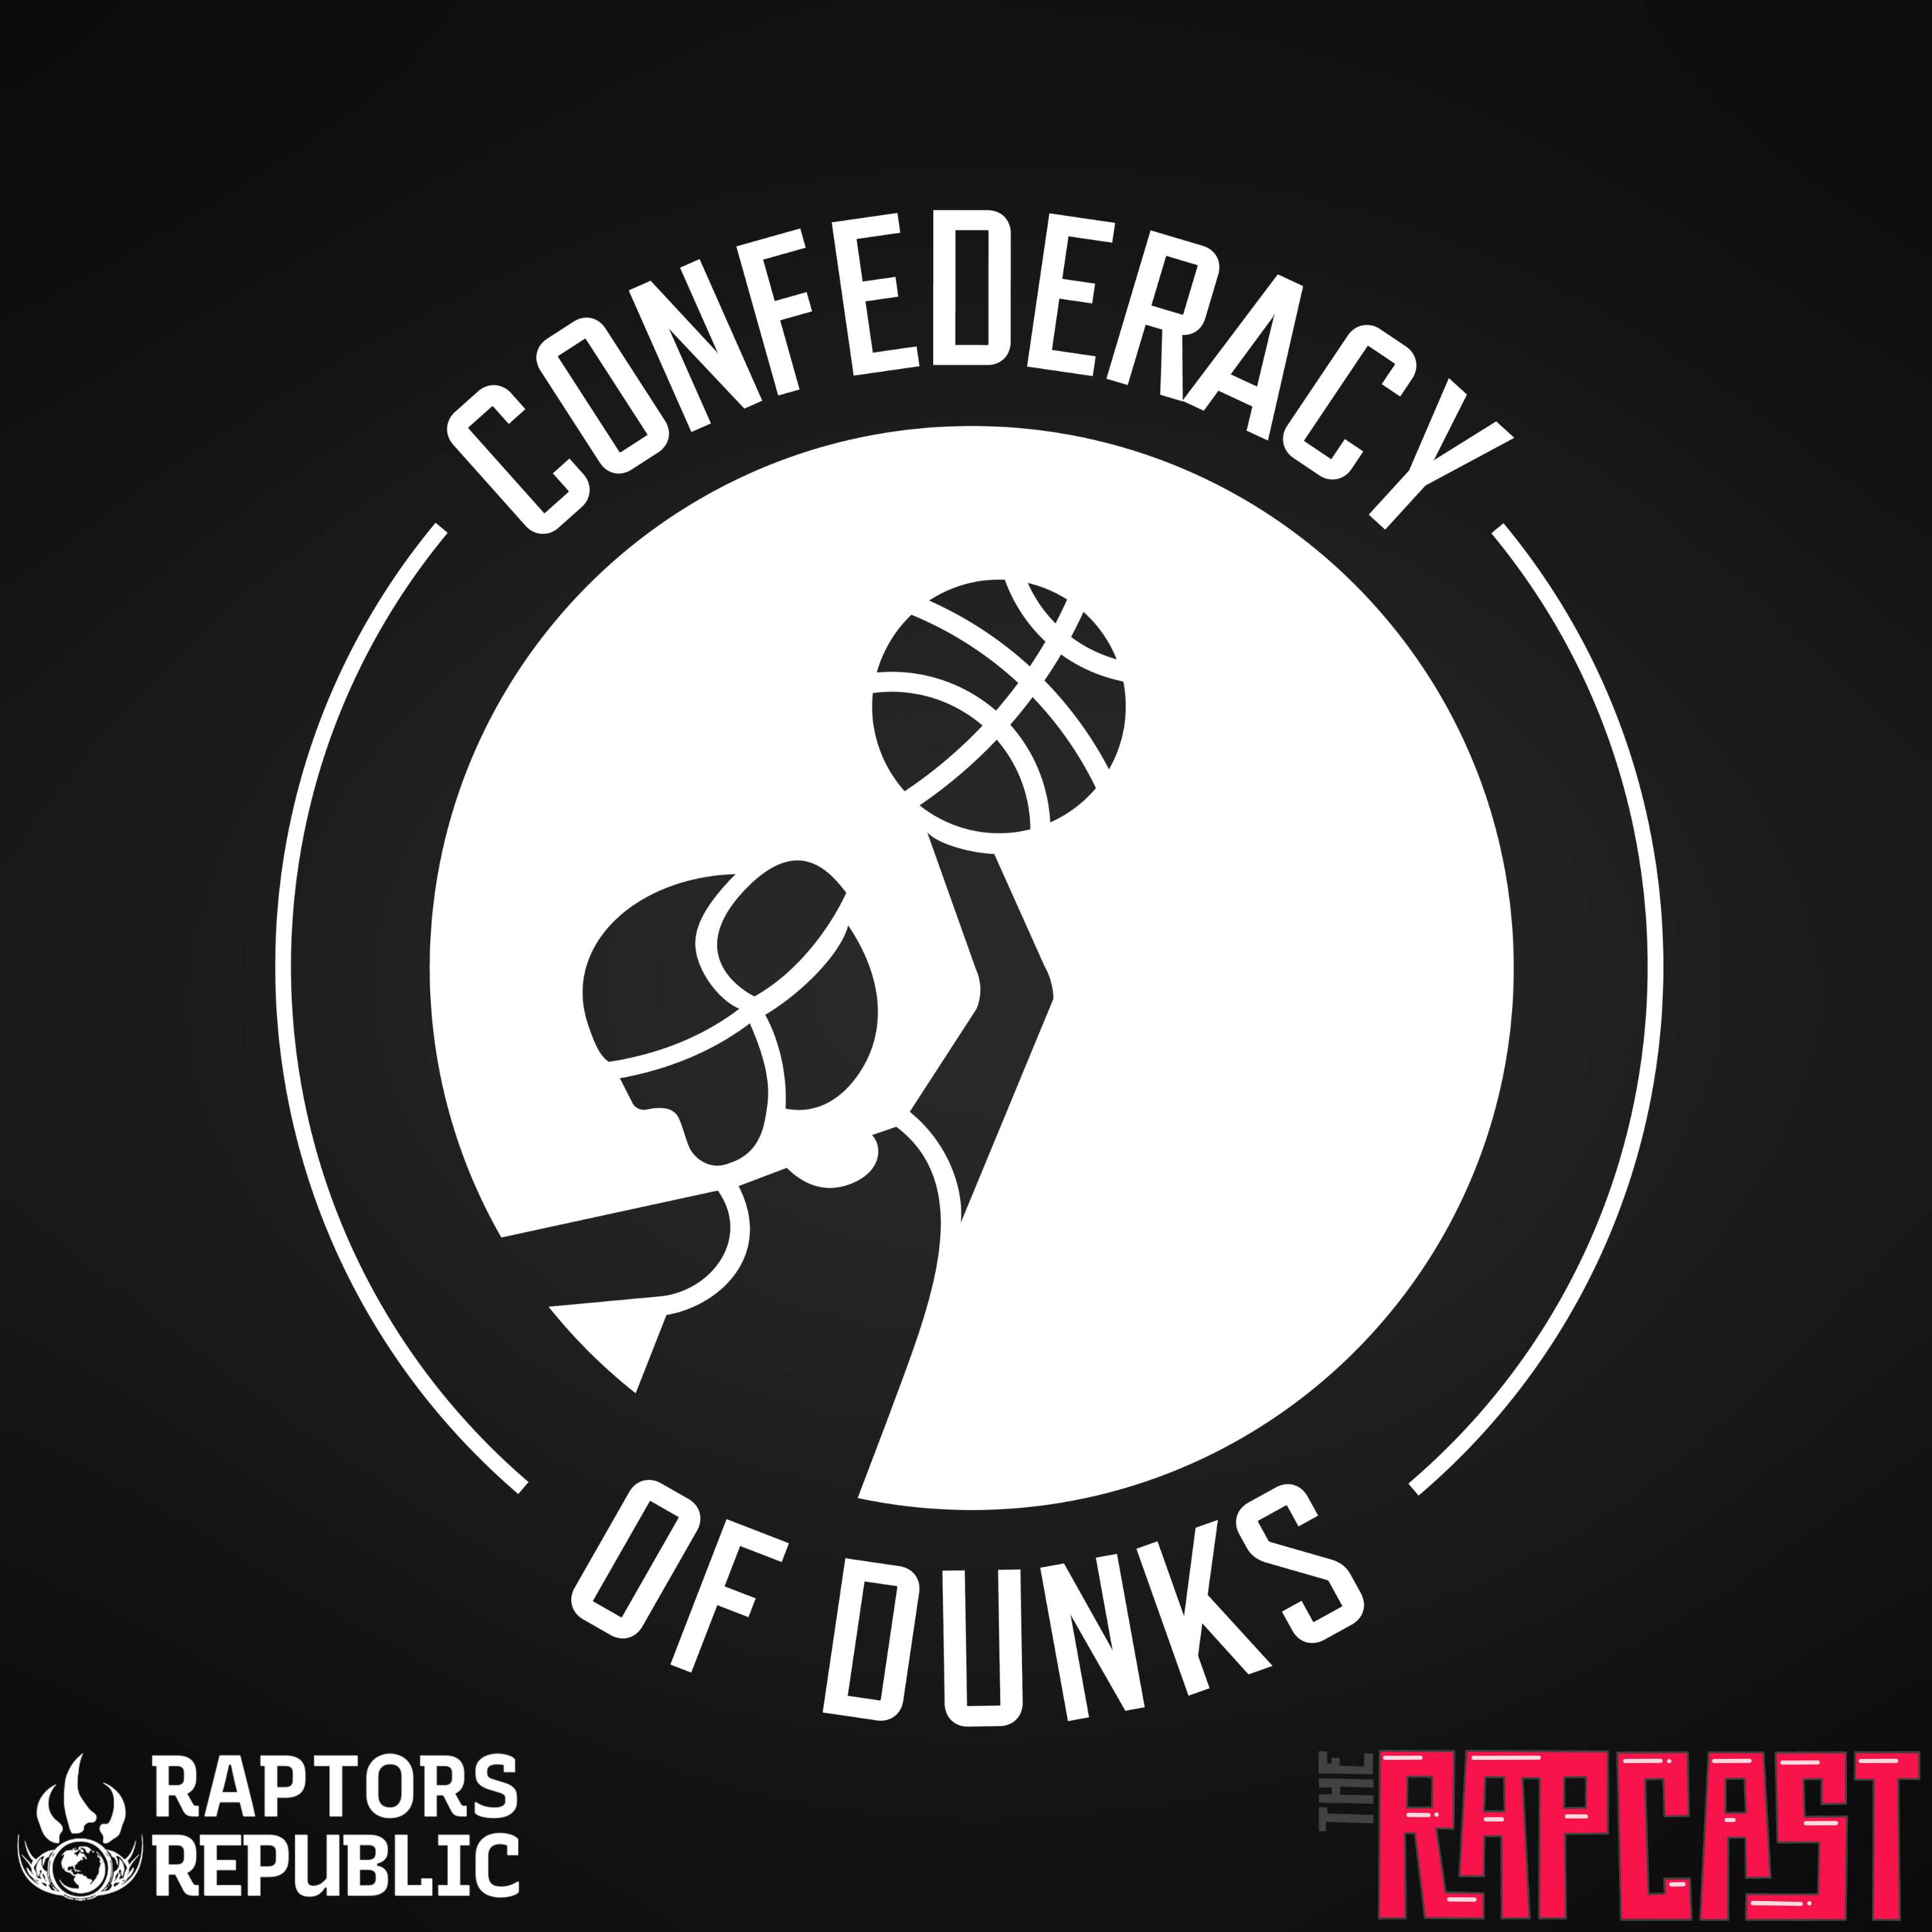 RJ & IQ are Raptors and the GOAT Draft - Confederacy of Dunks